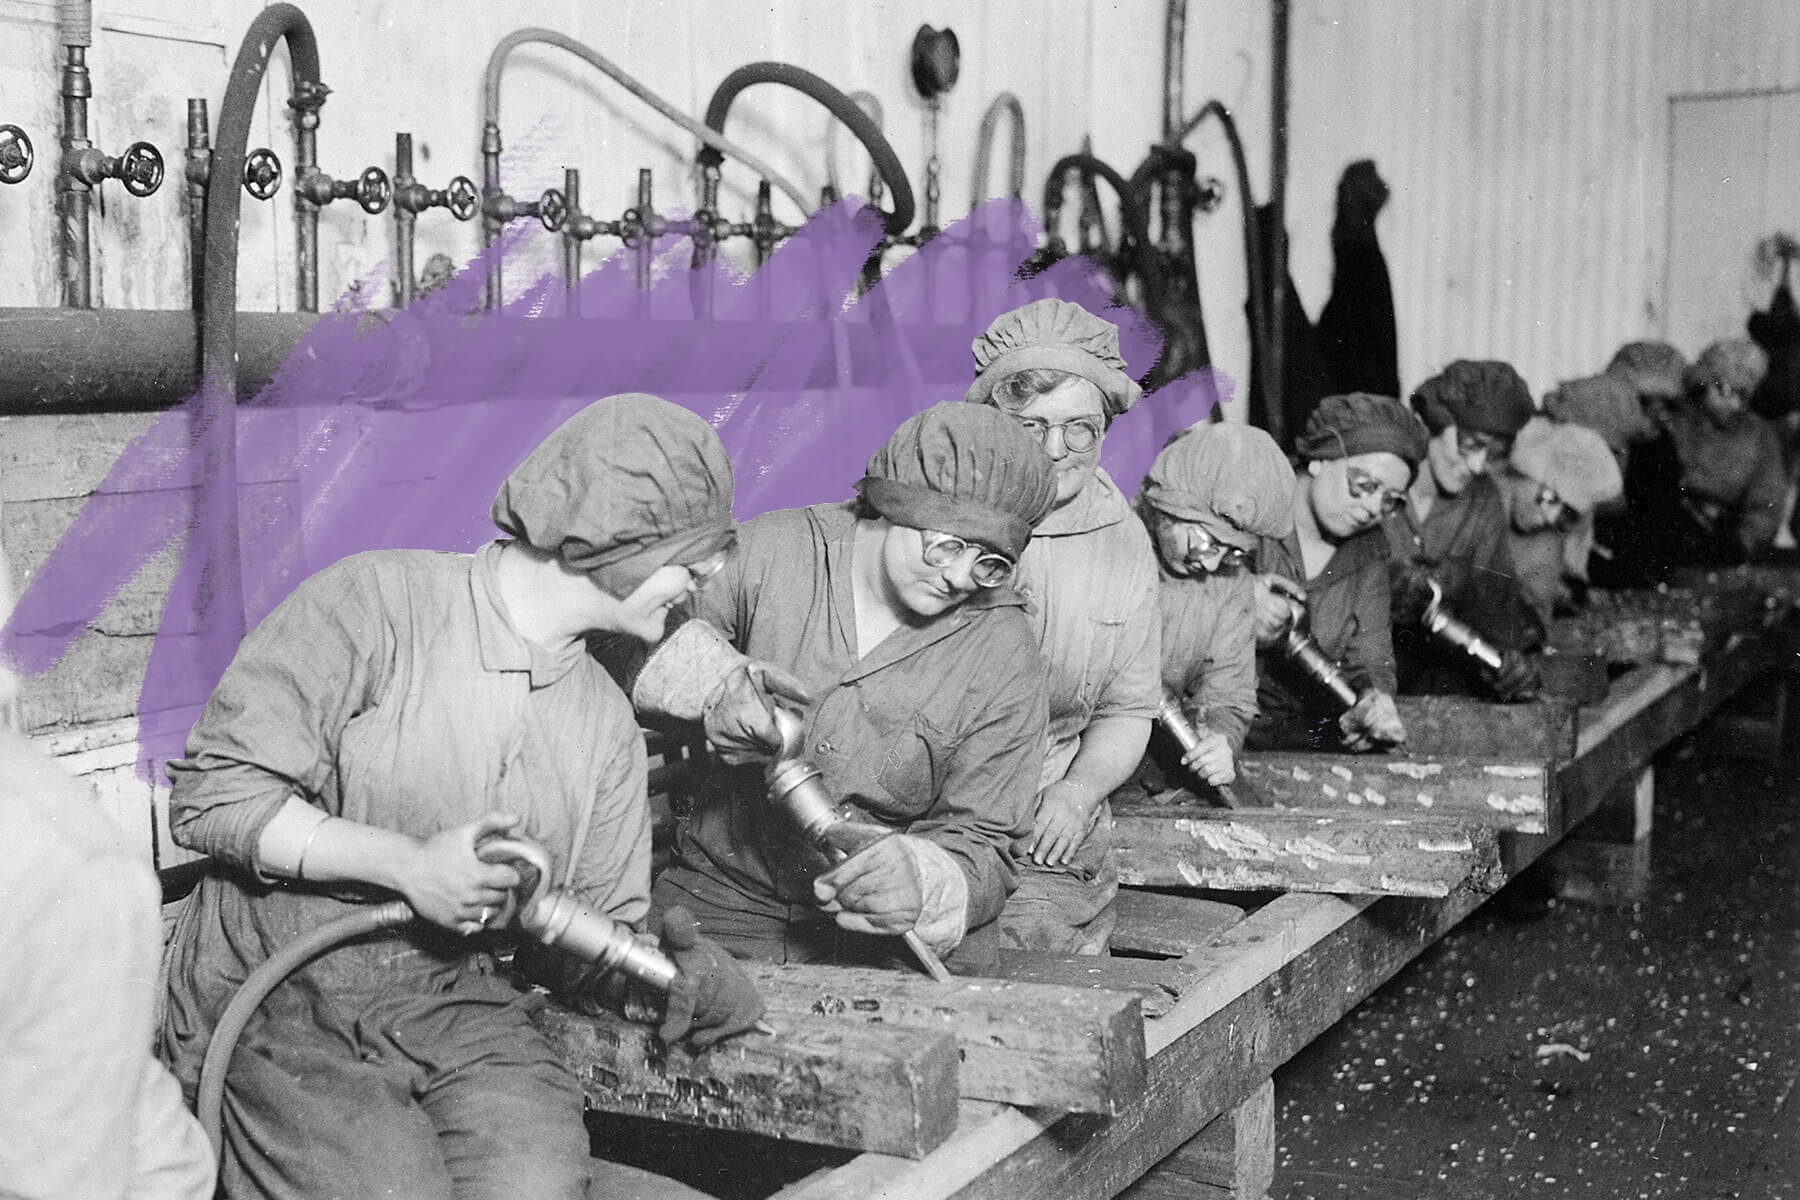 Women workers during WWI